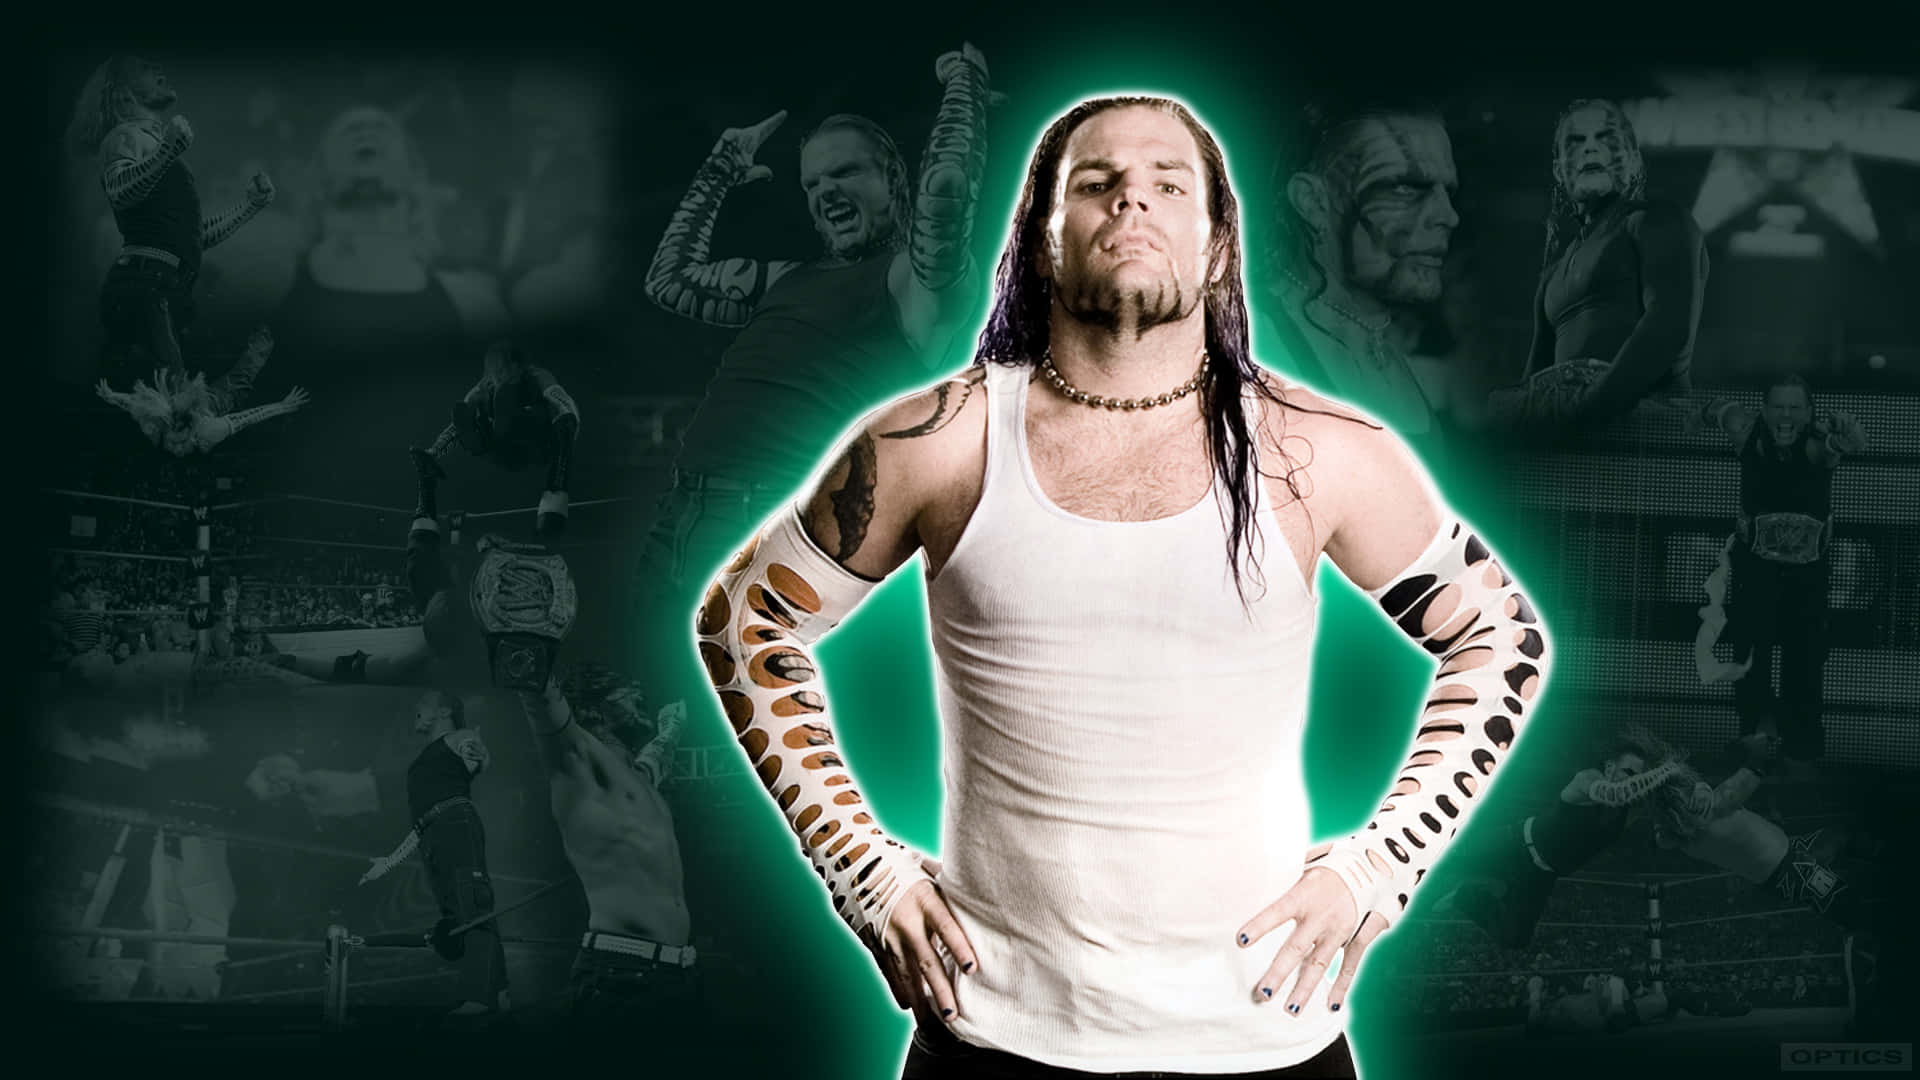 Wrestler Jeff Hardy Cool Poster Background